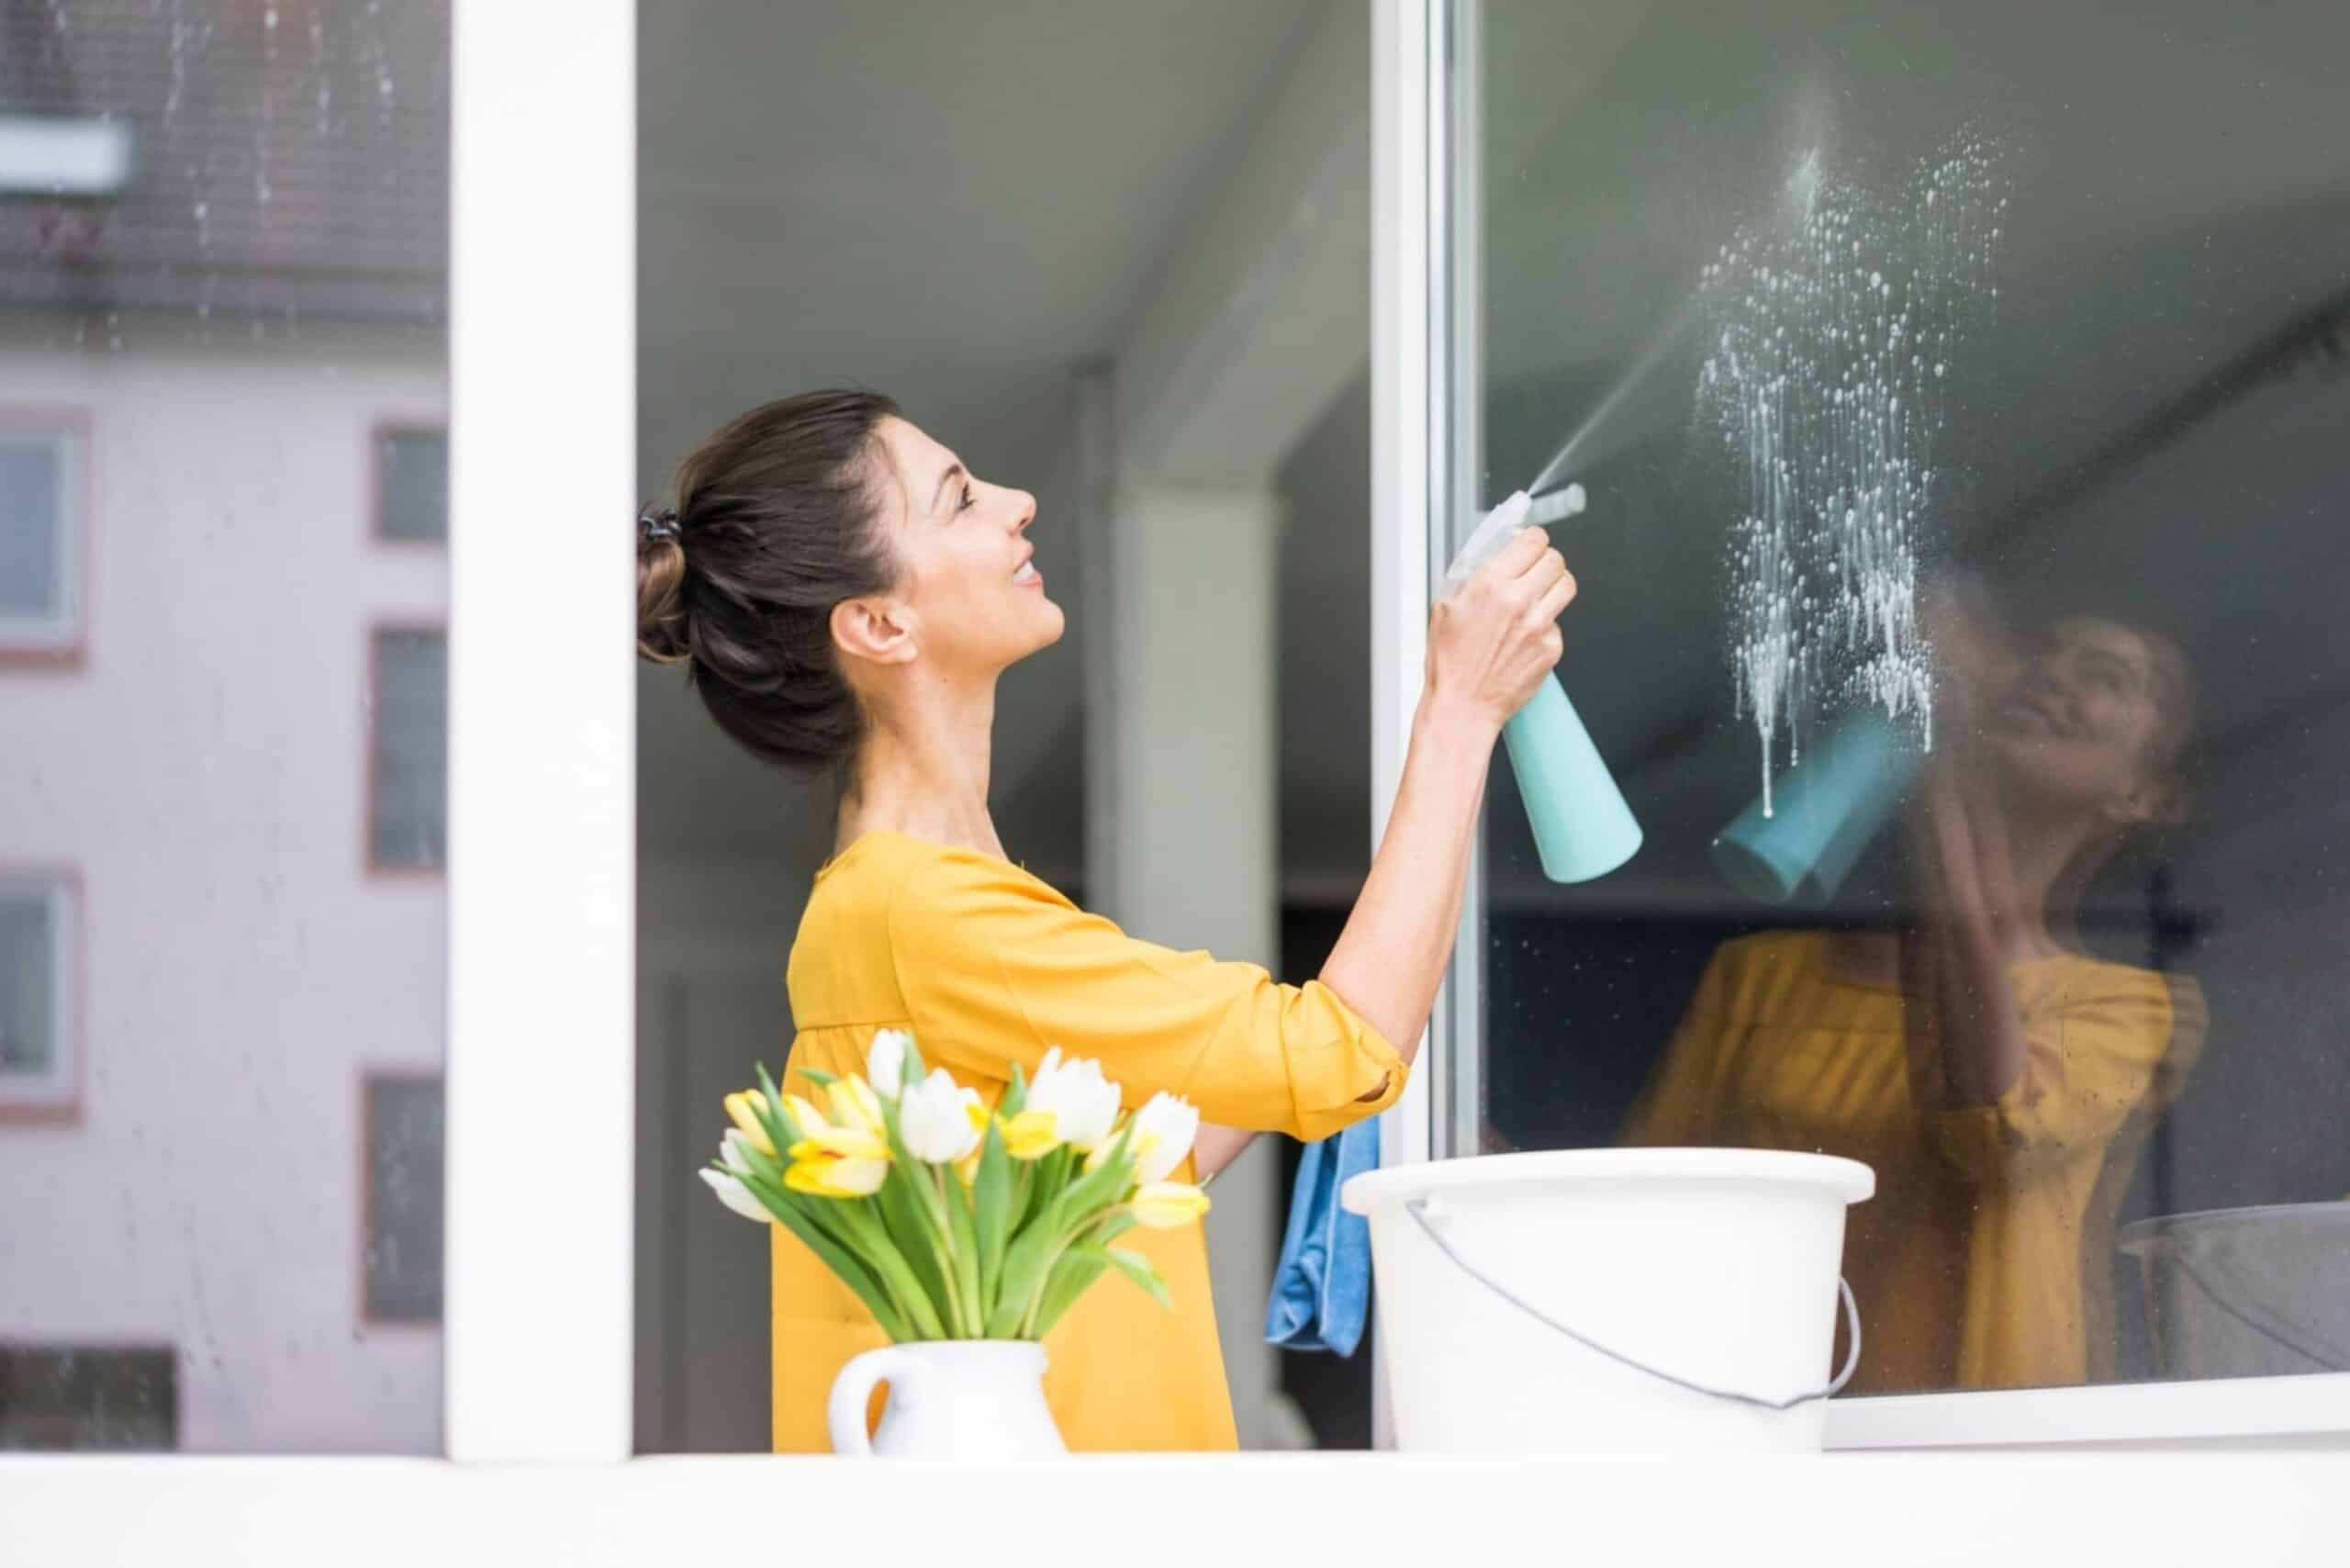 Make Your Own Homemade Glass Cleaner Tidyhere Image of a Woman Cleaning Windows